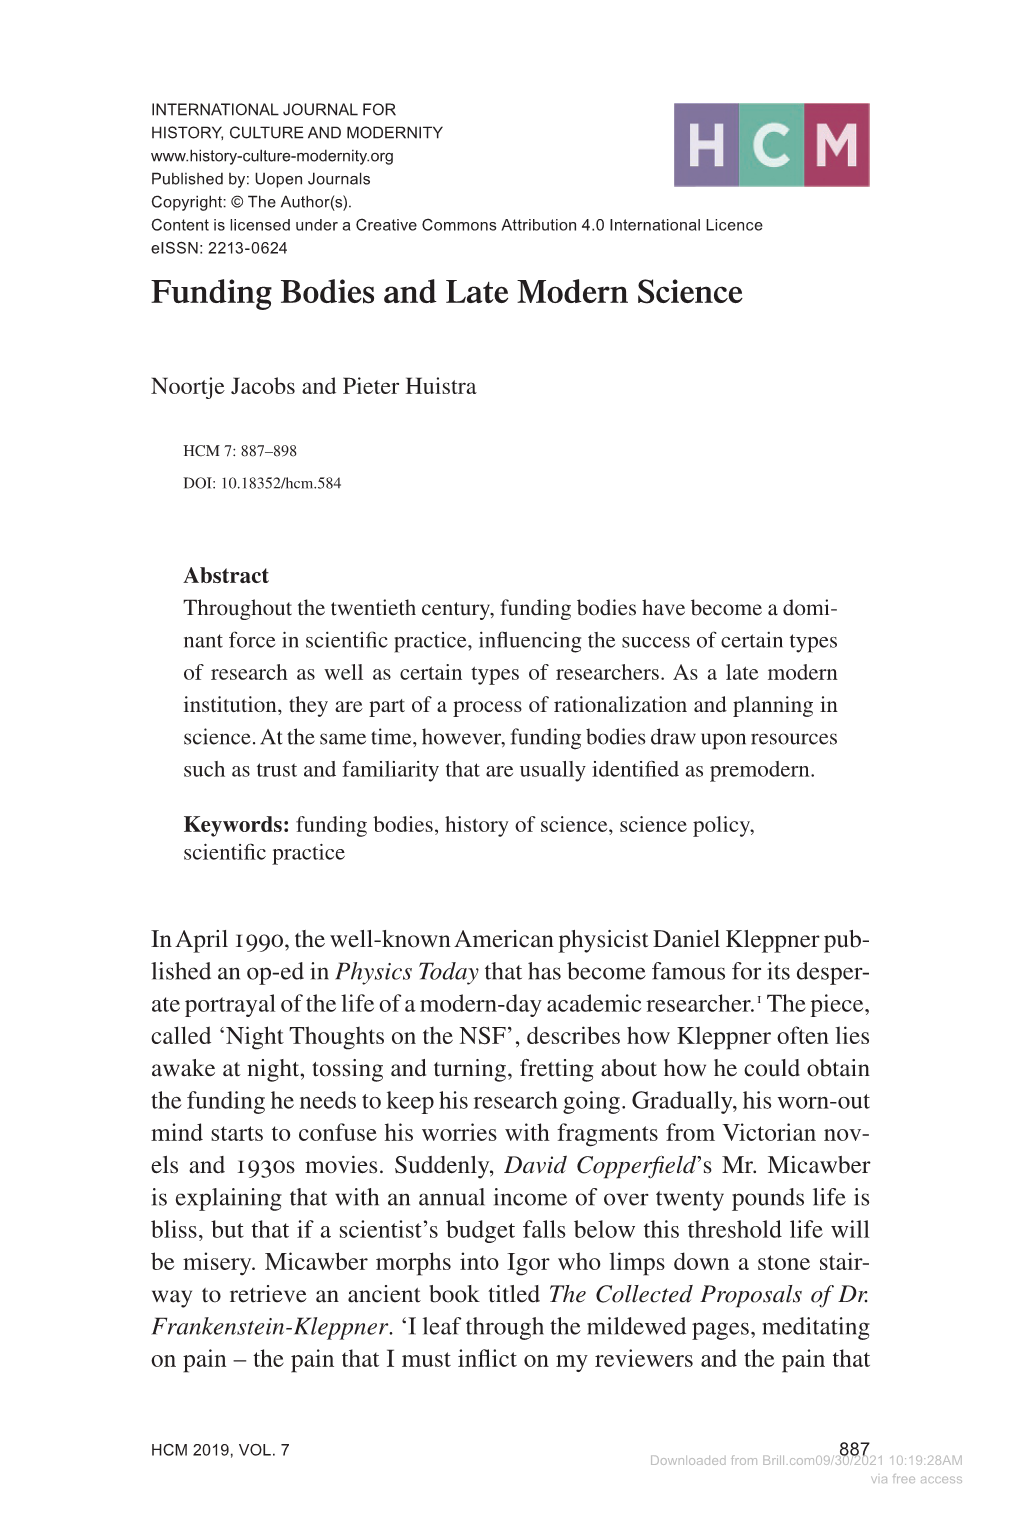 Funding Bodies and Late Modern Science